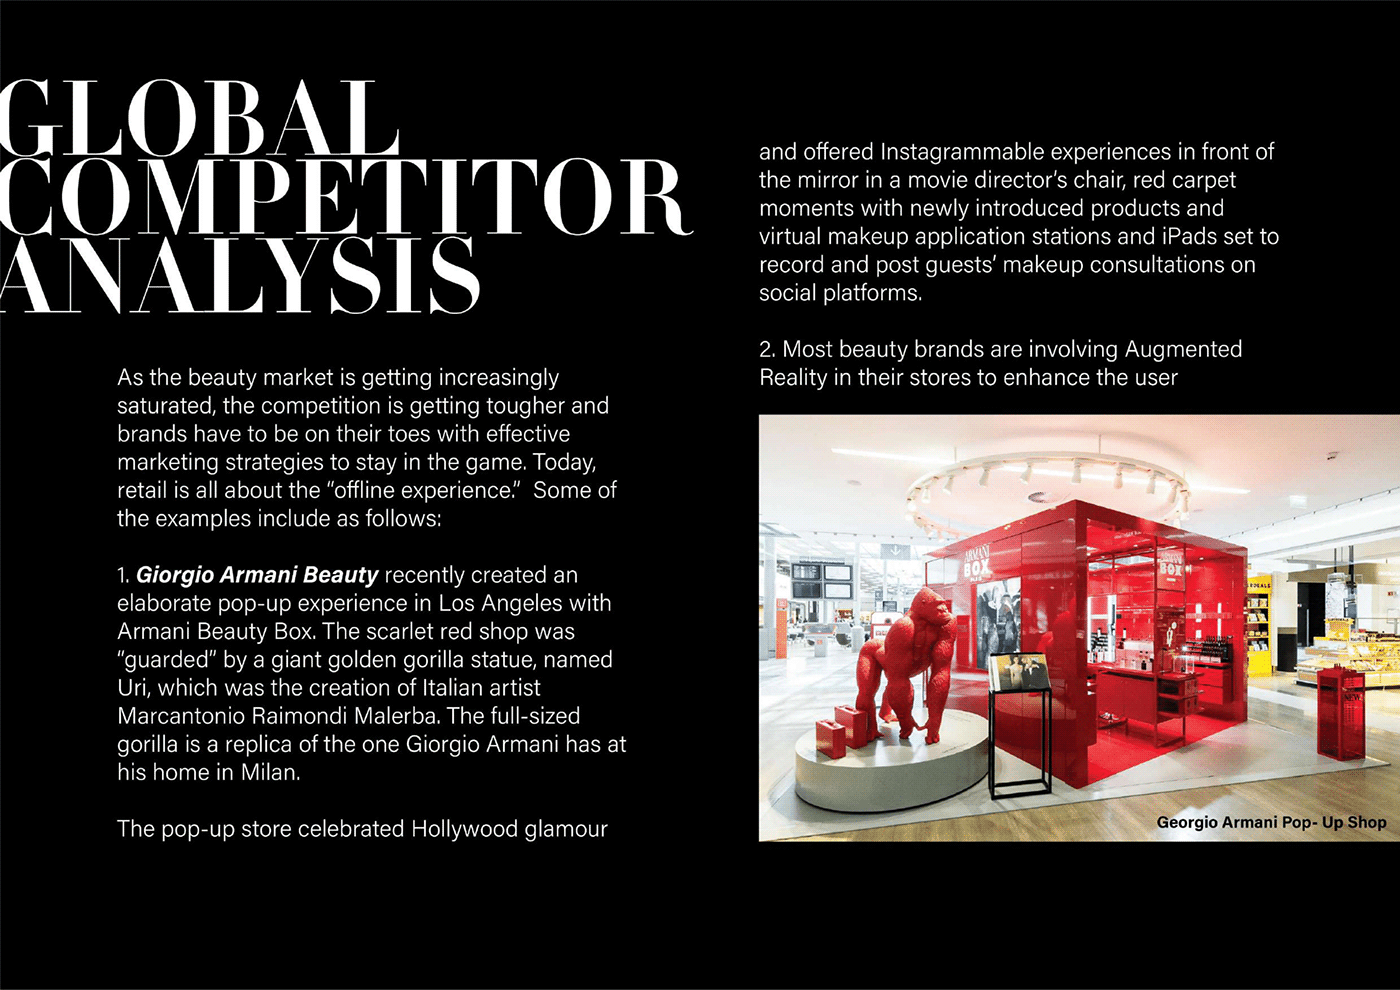 experience design makeup sephora Space  store experience user experience Visual Merchandising campaign merchandise